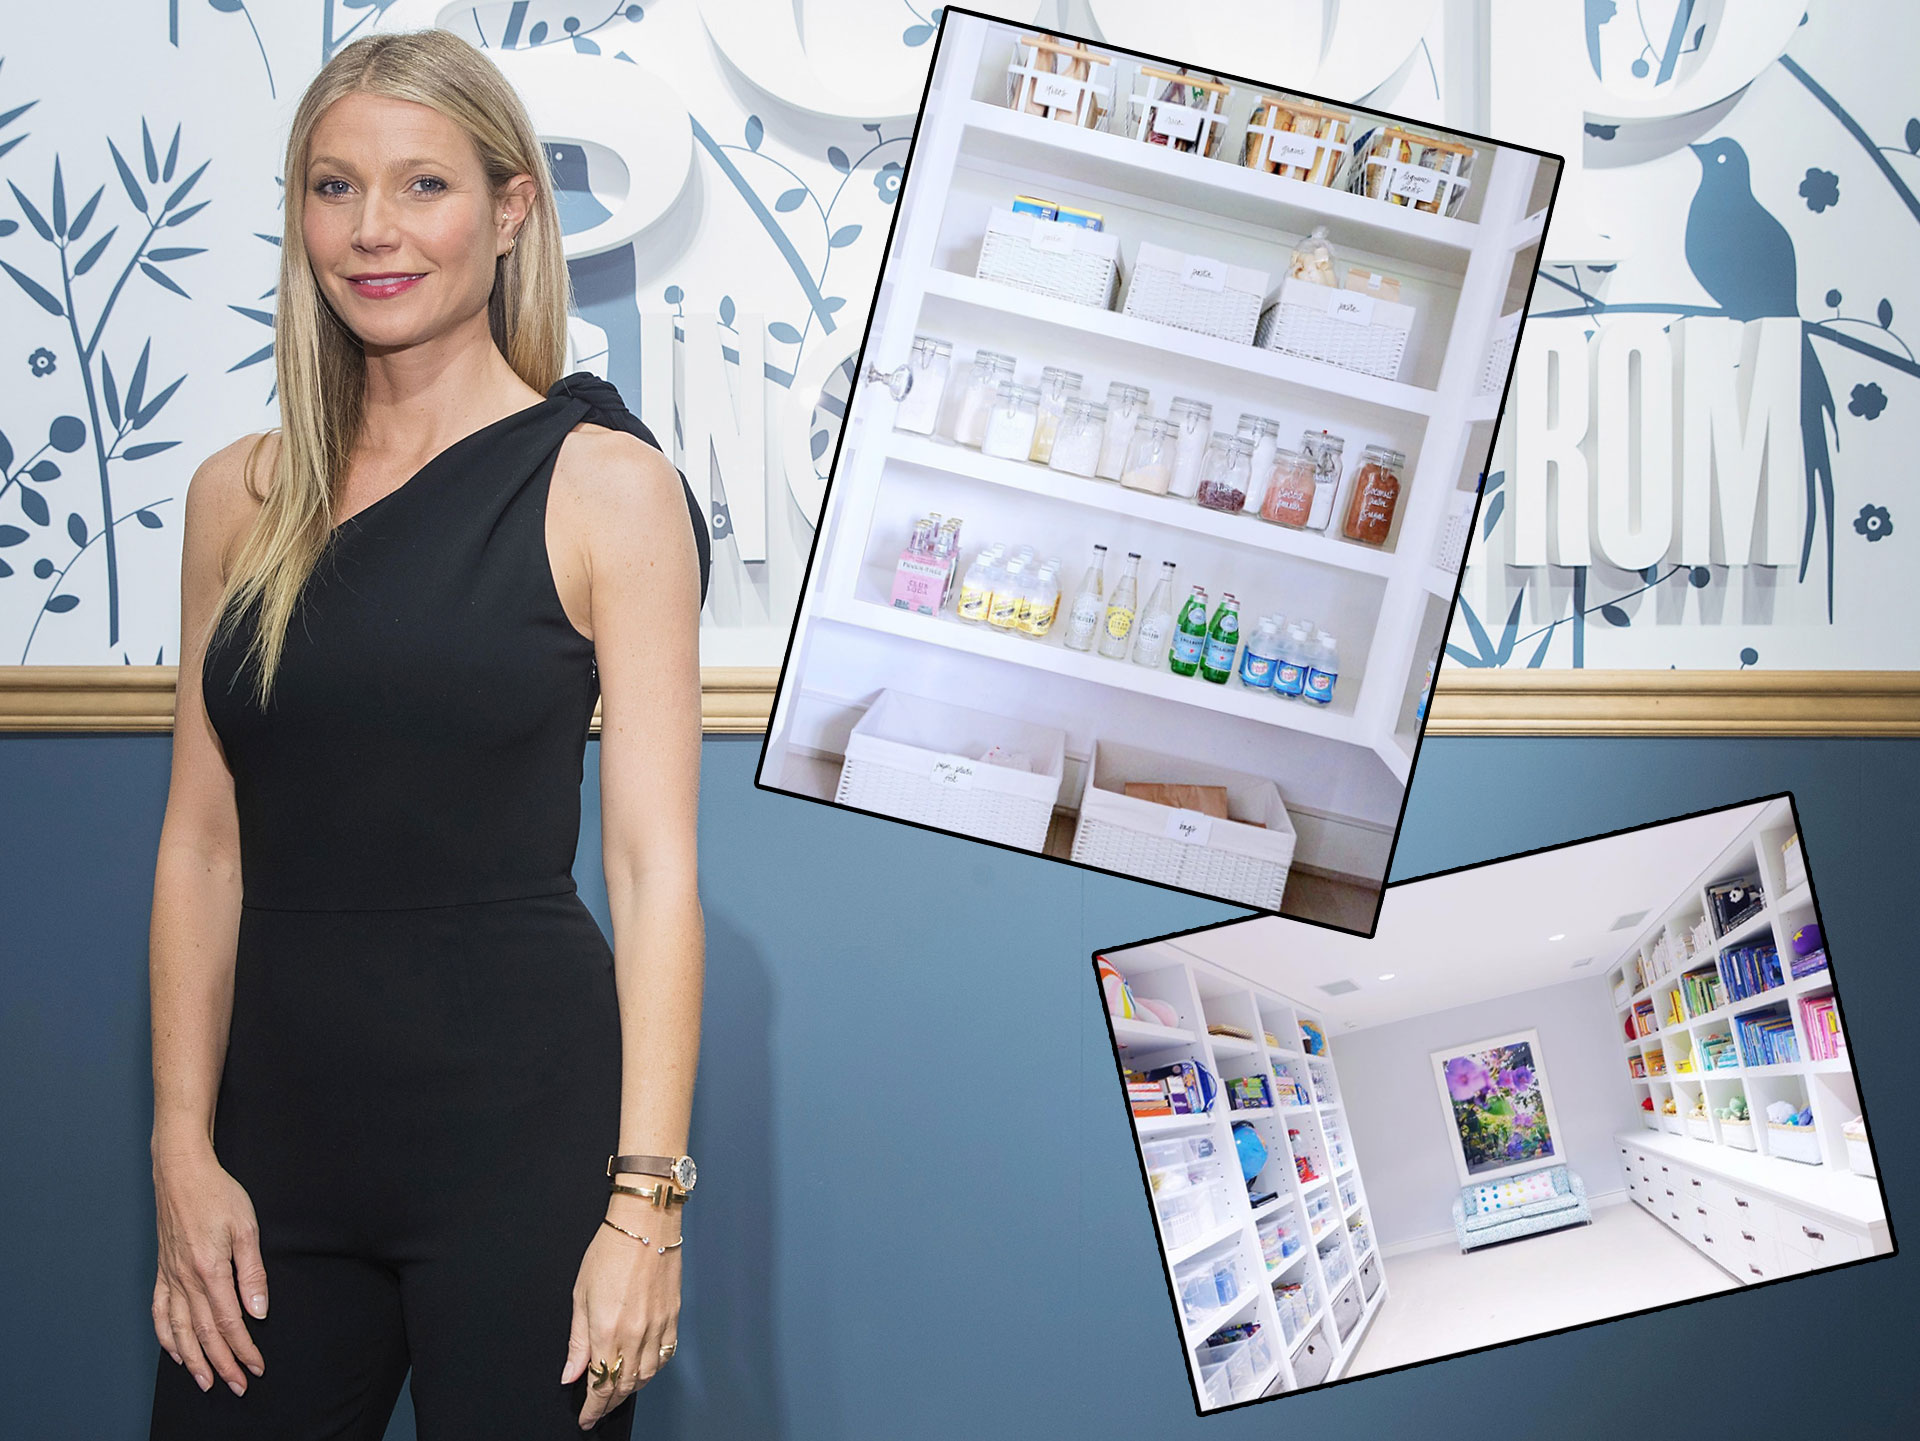 Gwyneth Paltrow swears by these home organisation rules